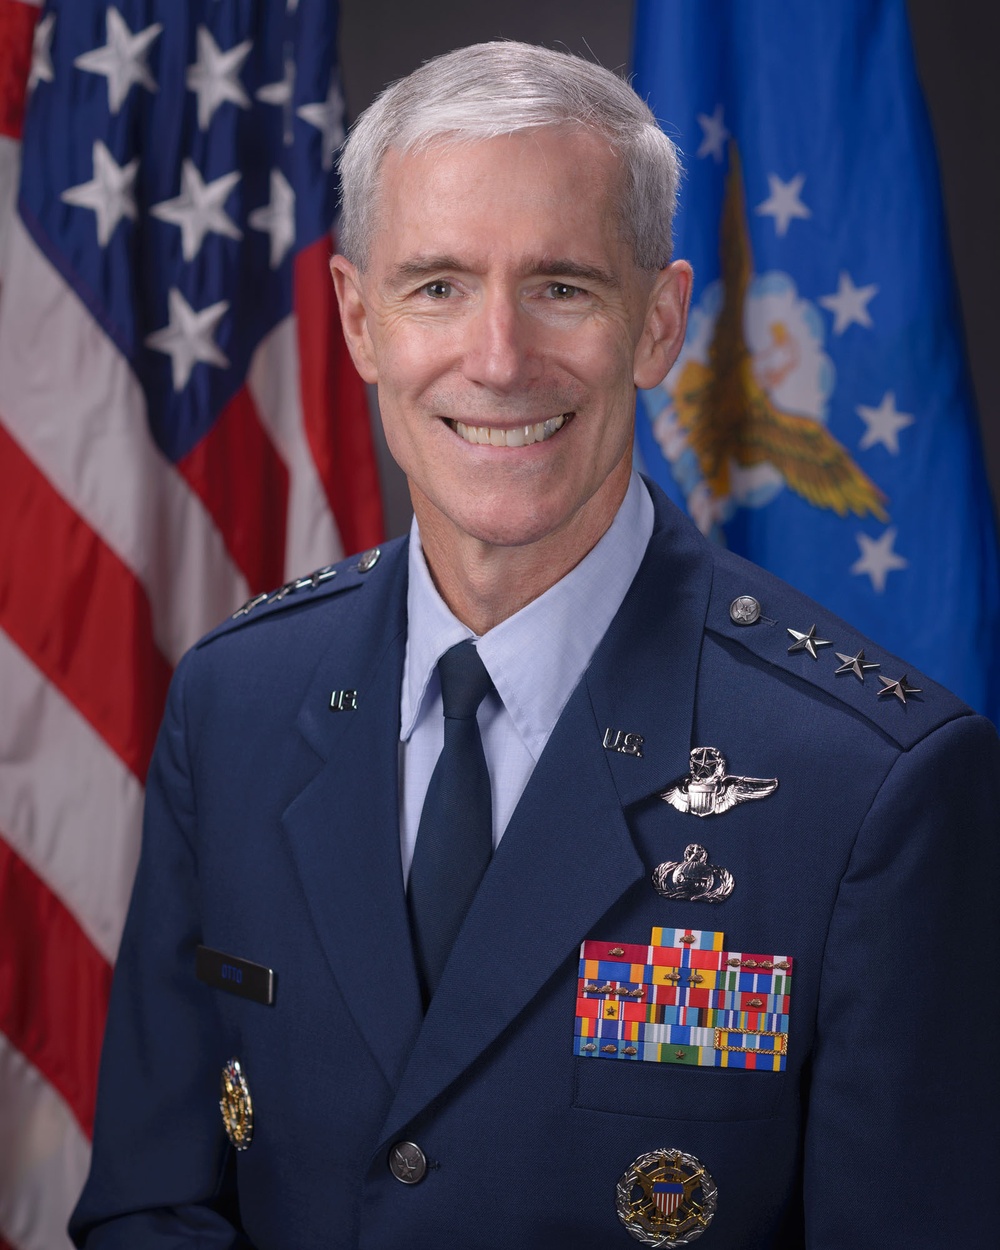 Q+A with Lt Gen Otto about the ISR community and its future